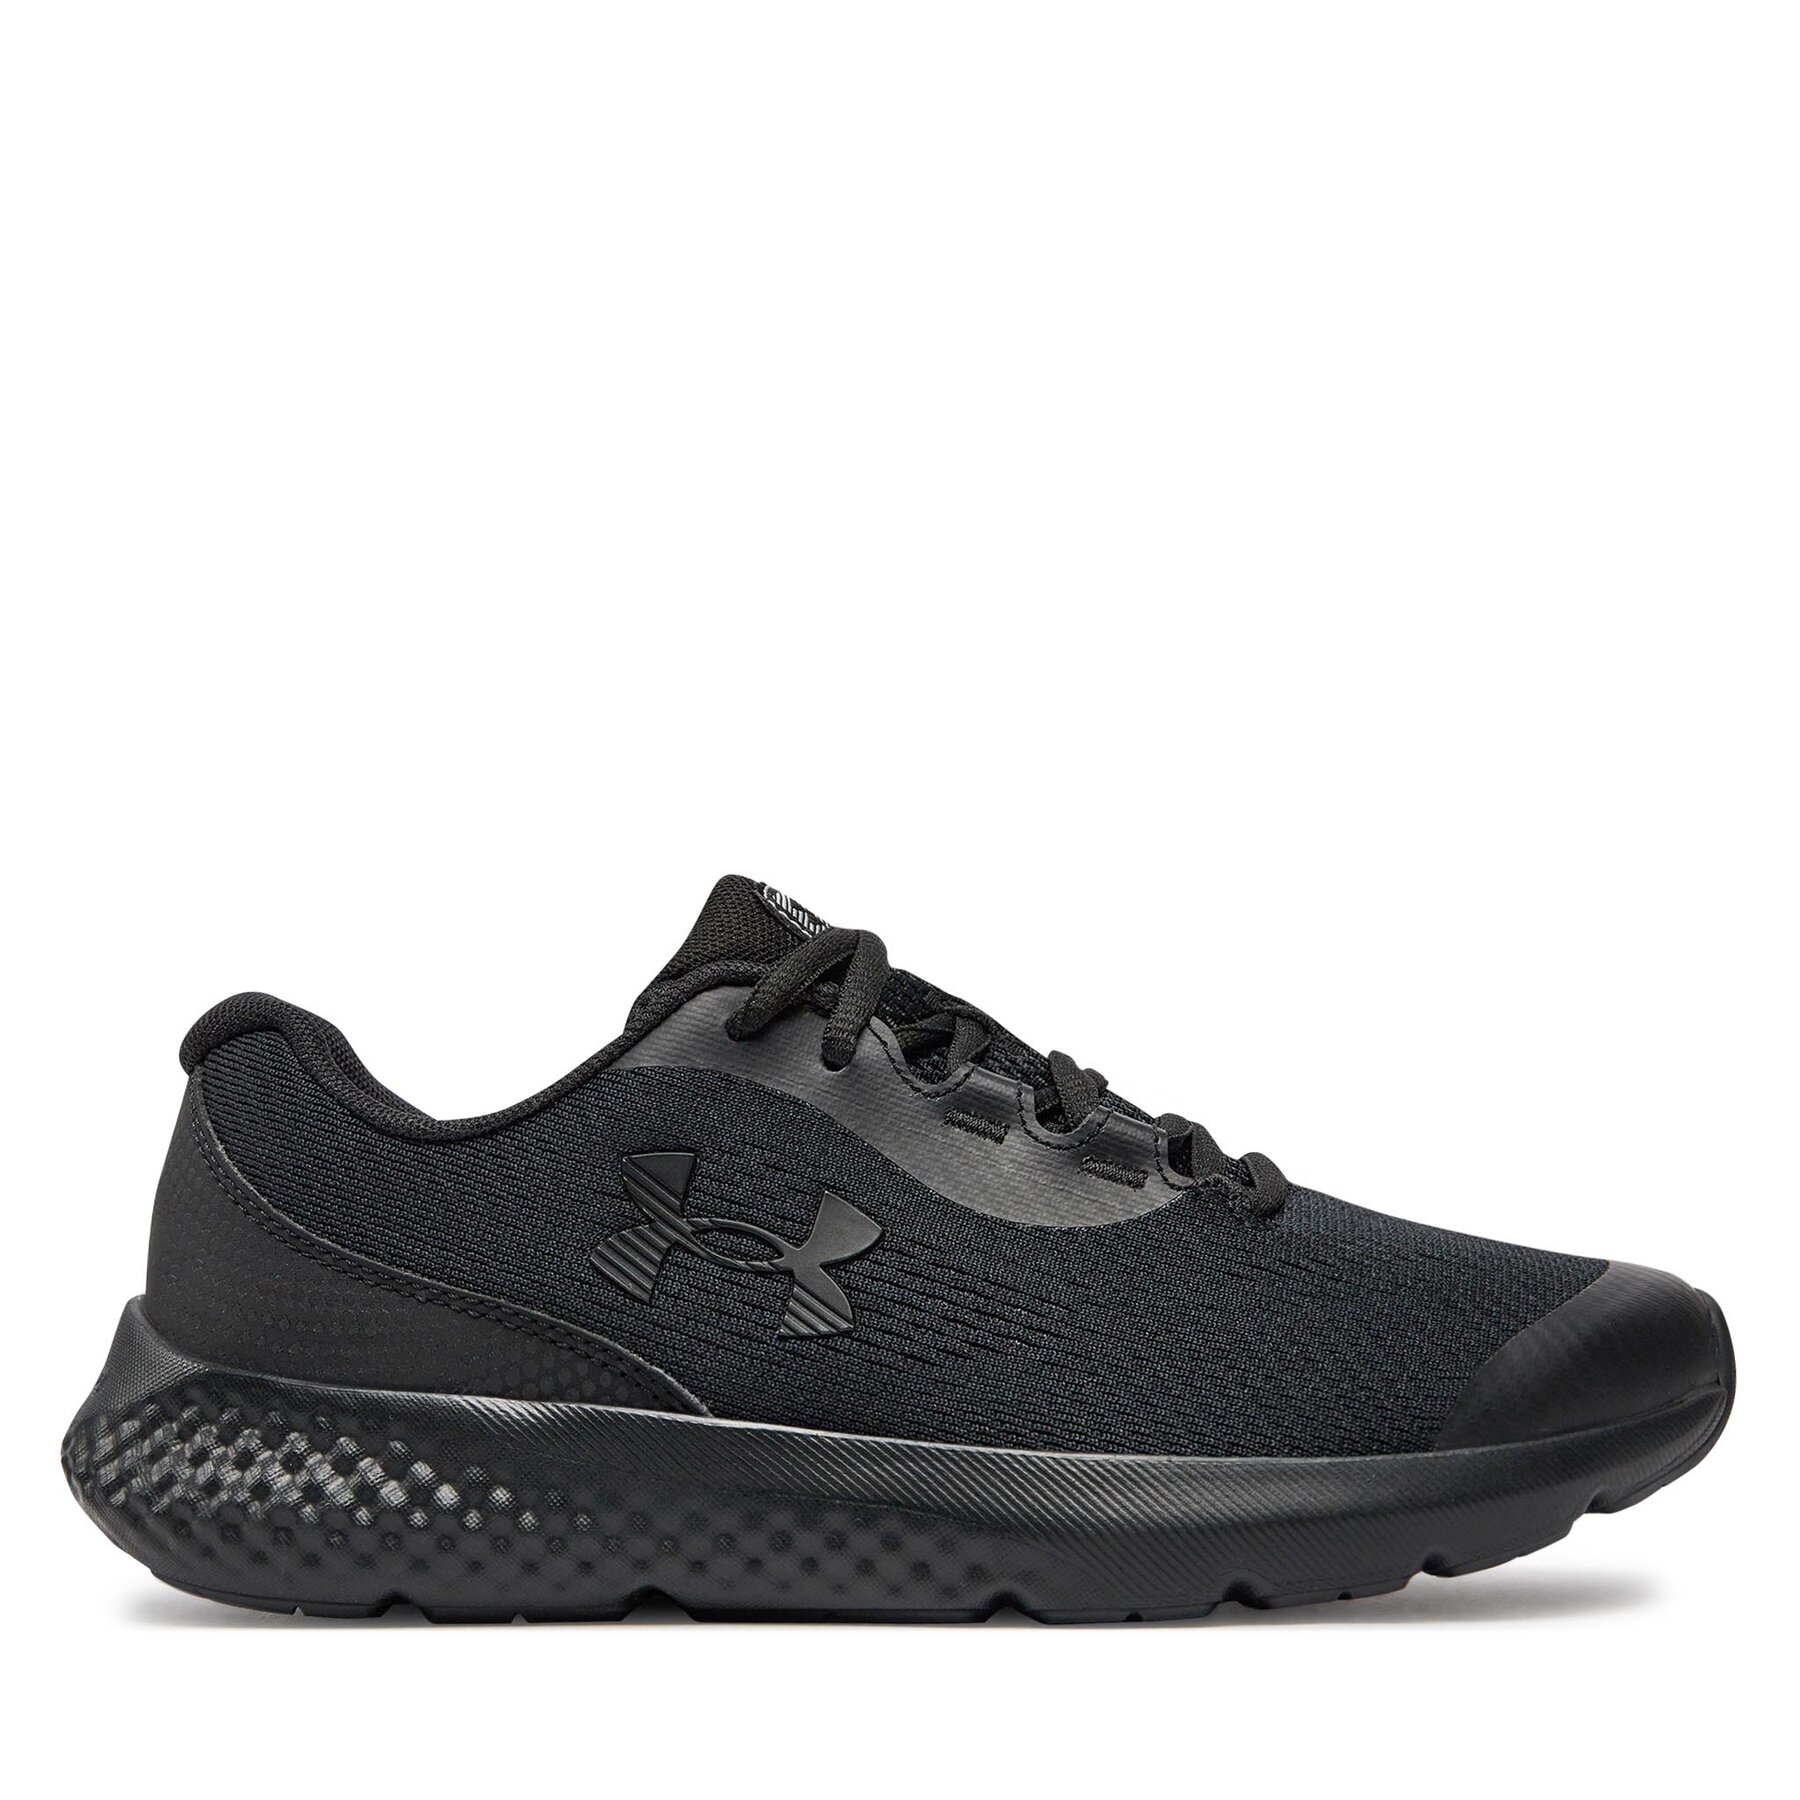 Schuhe Under Armour Ua Bgs Charged Rogue 4 3027106-002 Black/Black/Black von Under Armour